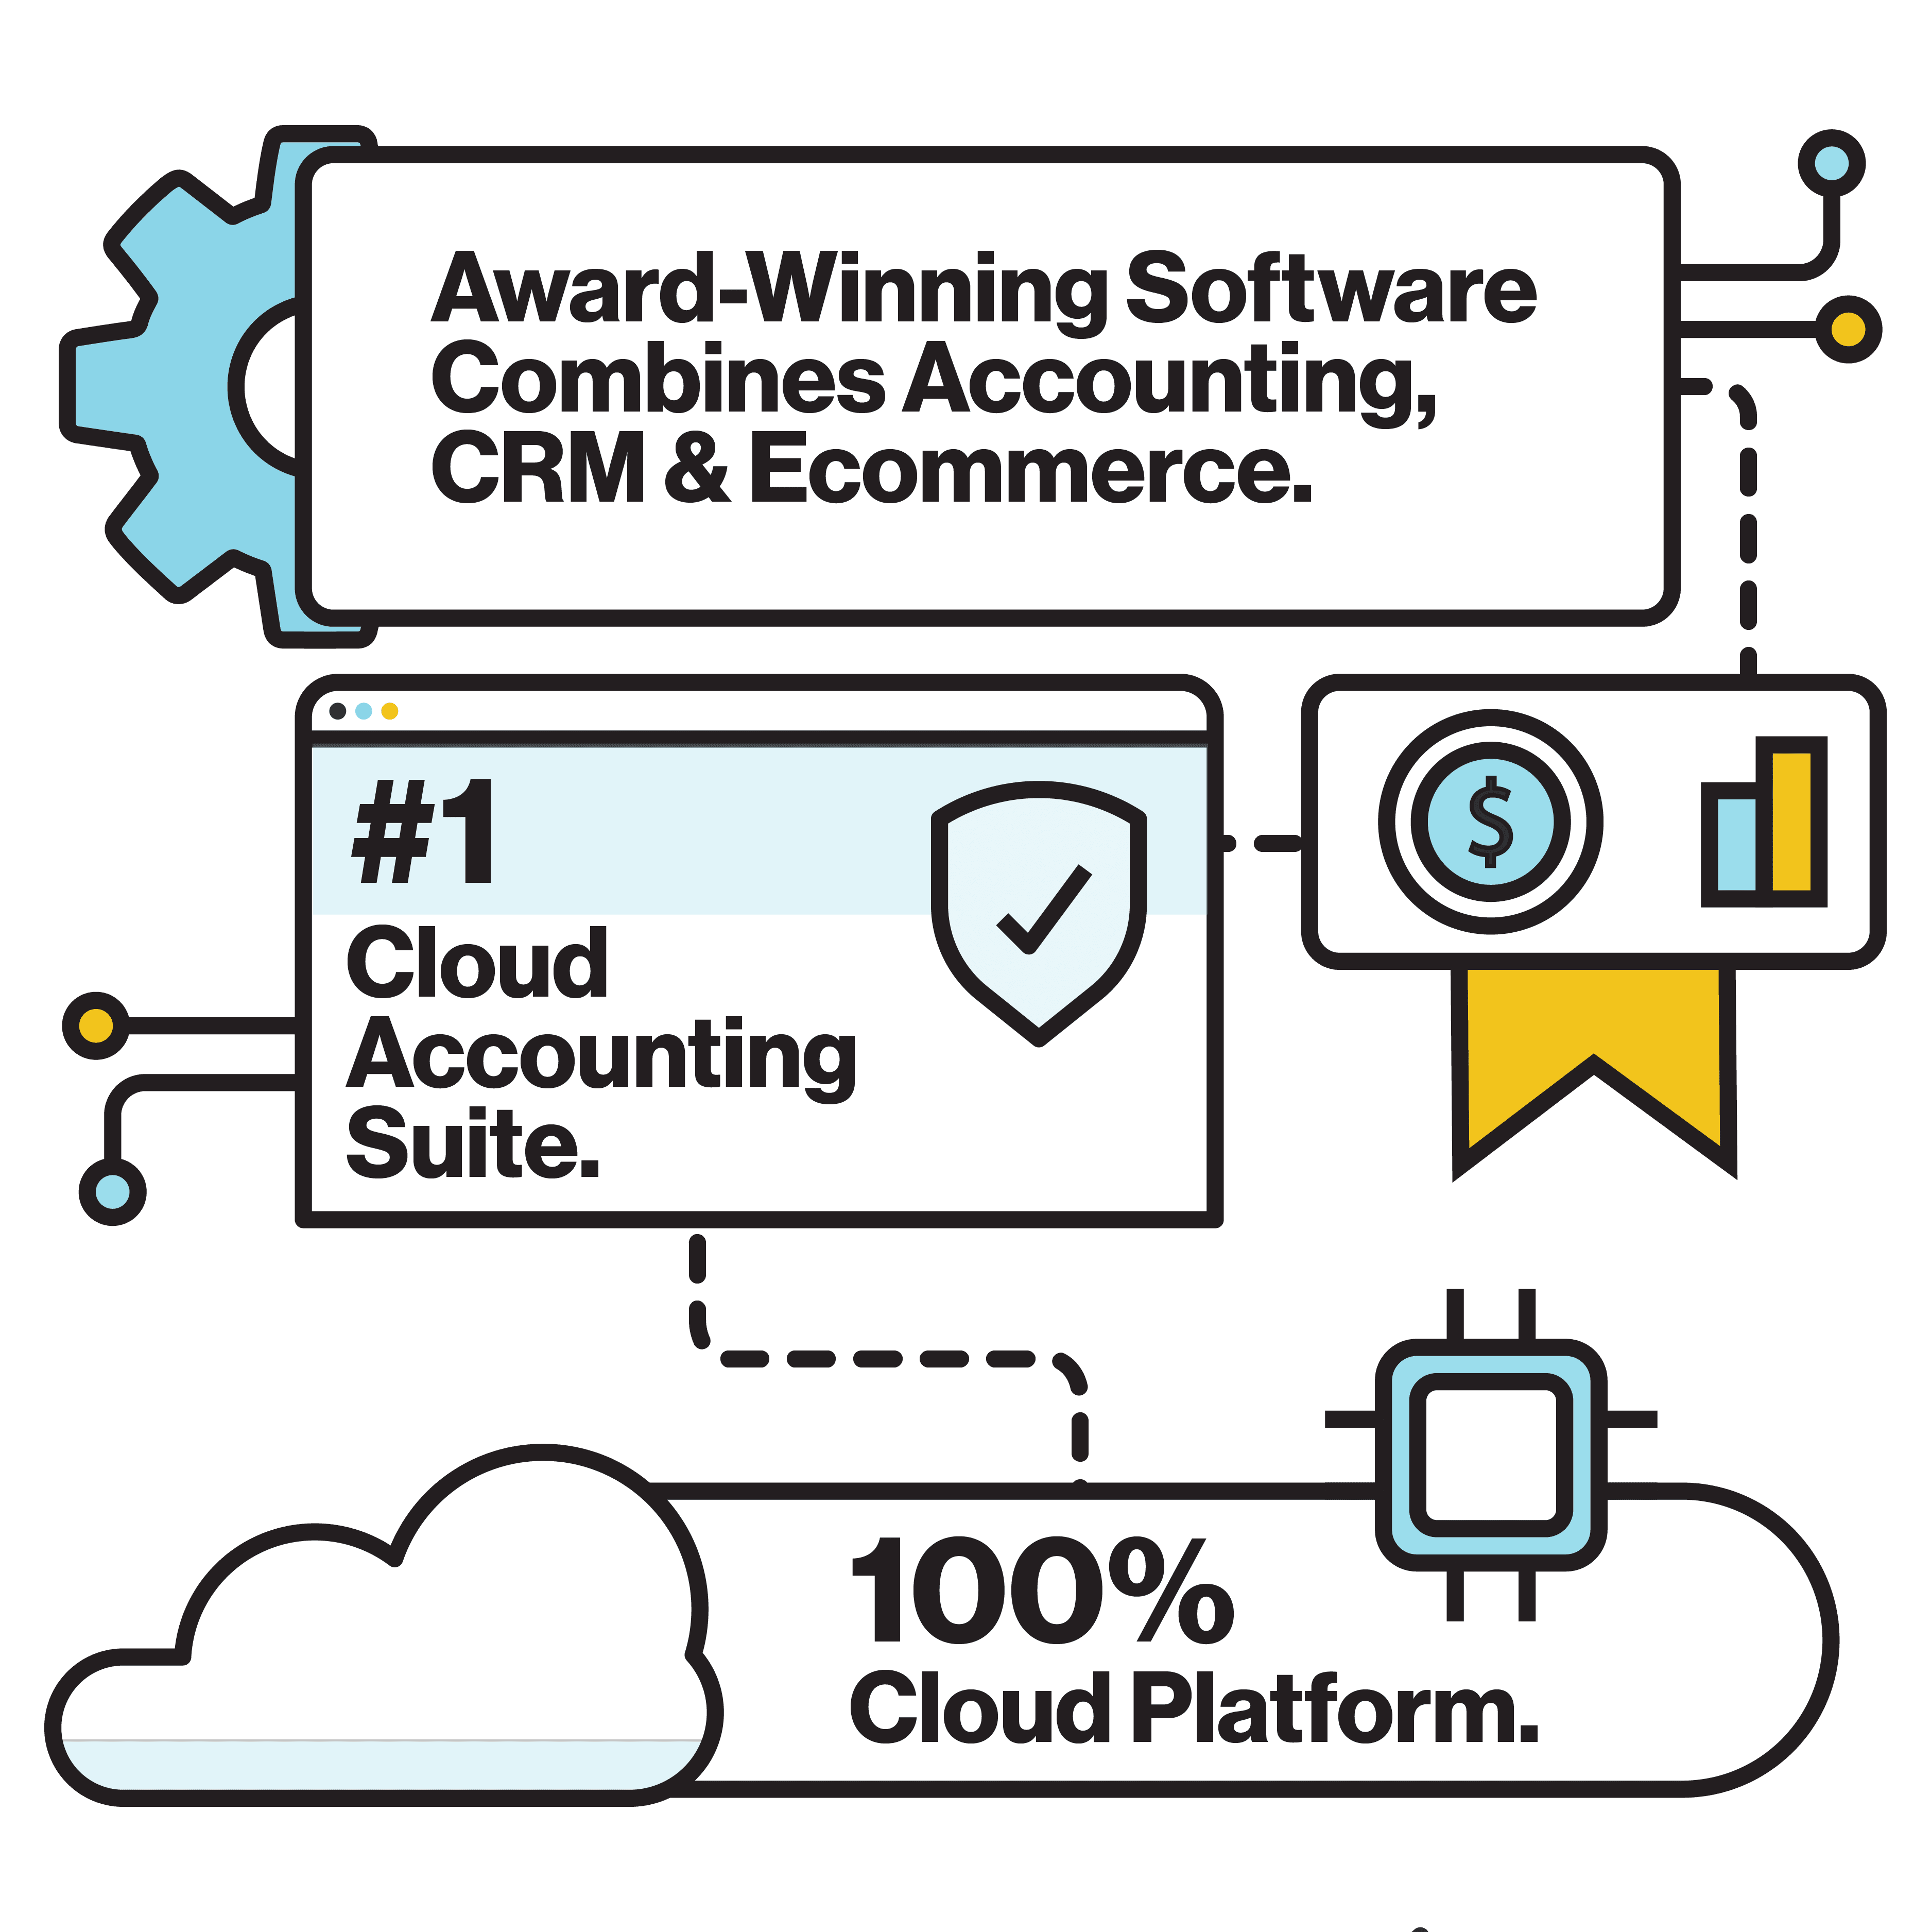 Award-Winning Software Combines Accounting, CRM & Ecommerce.100% Cloud Platform. #1 Cloud Accounting Suite.